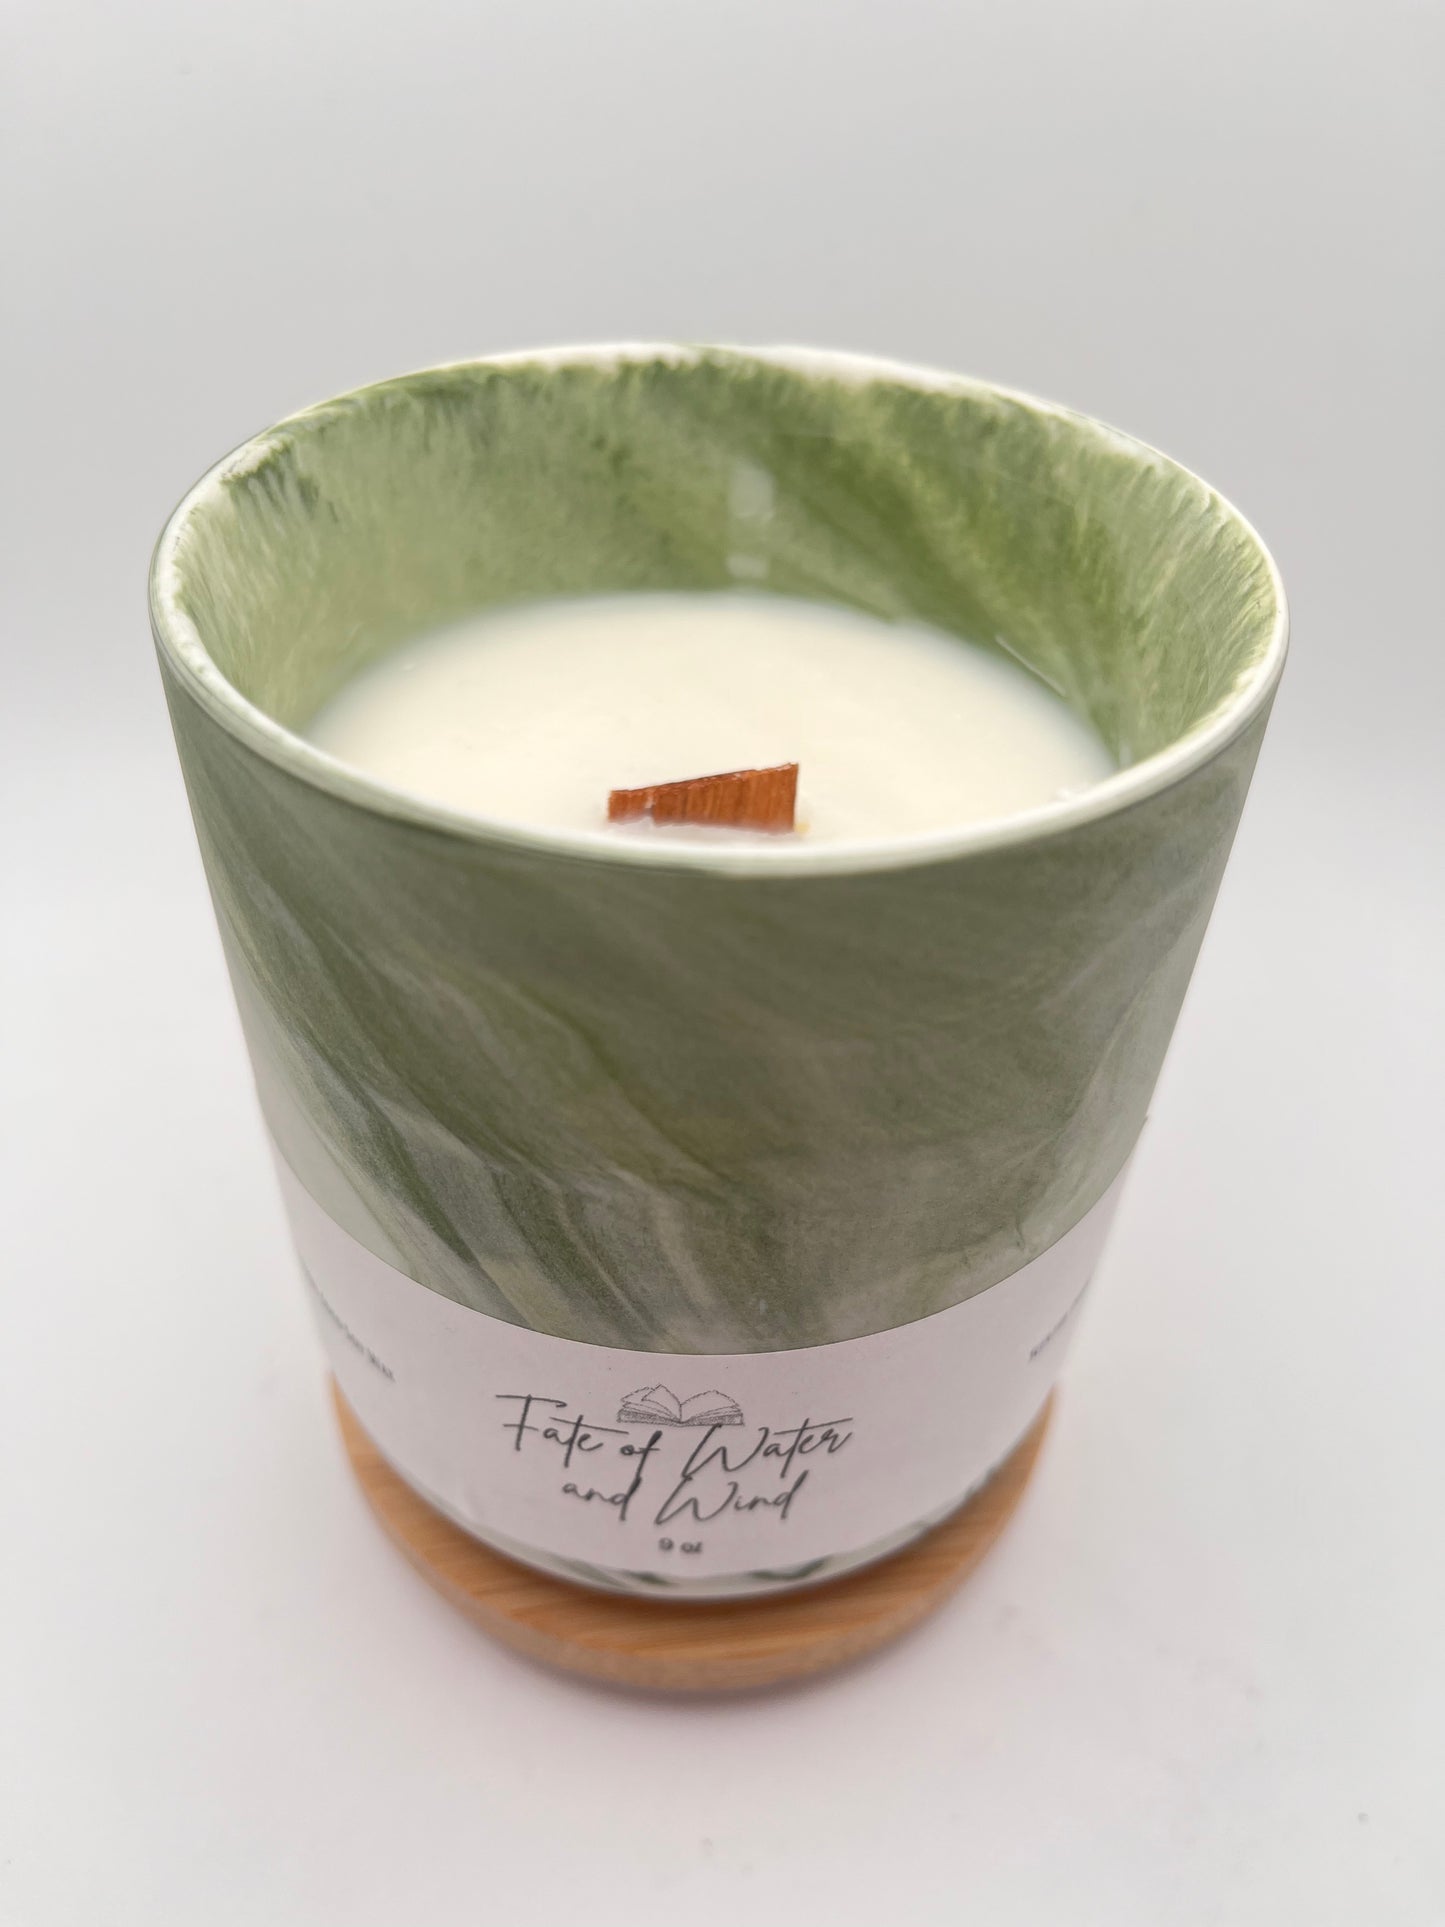 Fate of Water and Wind Candle